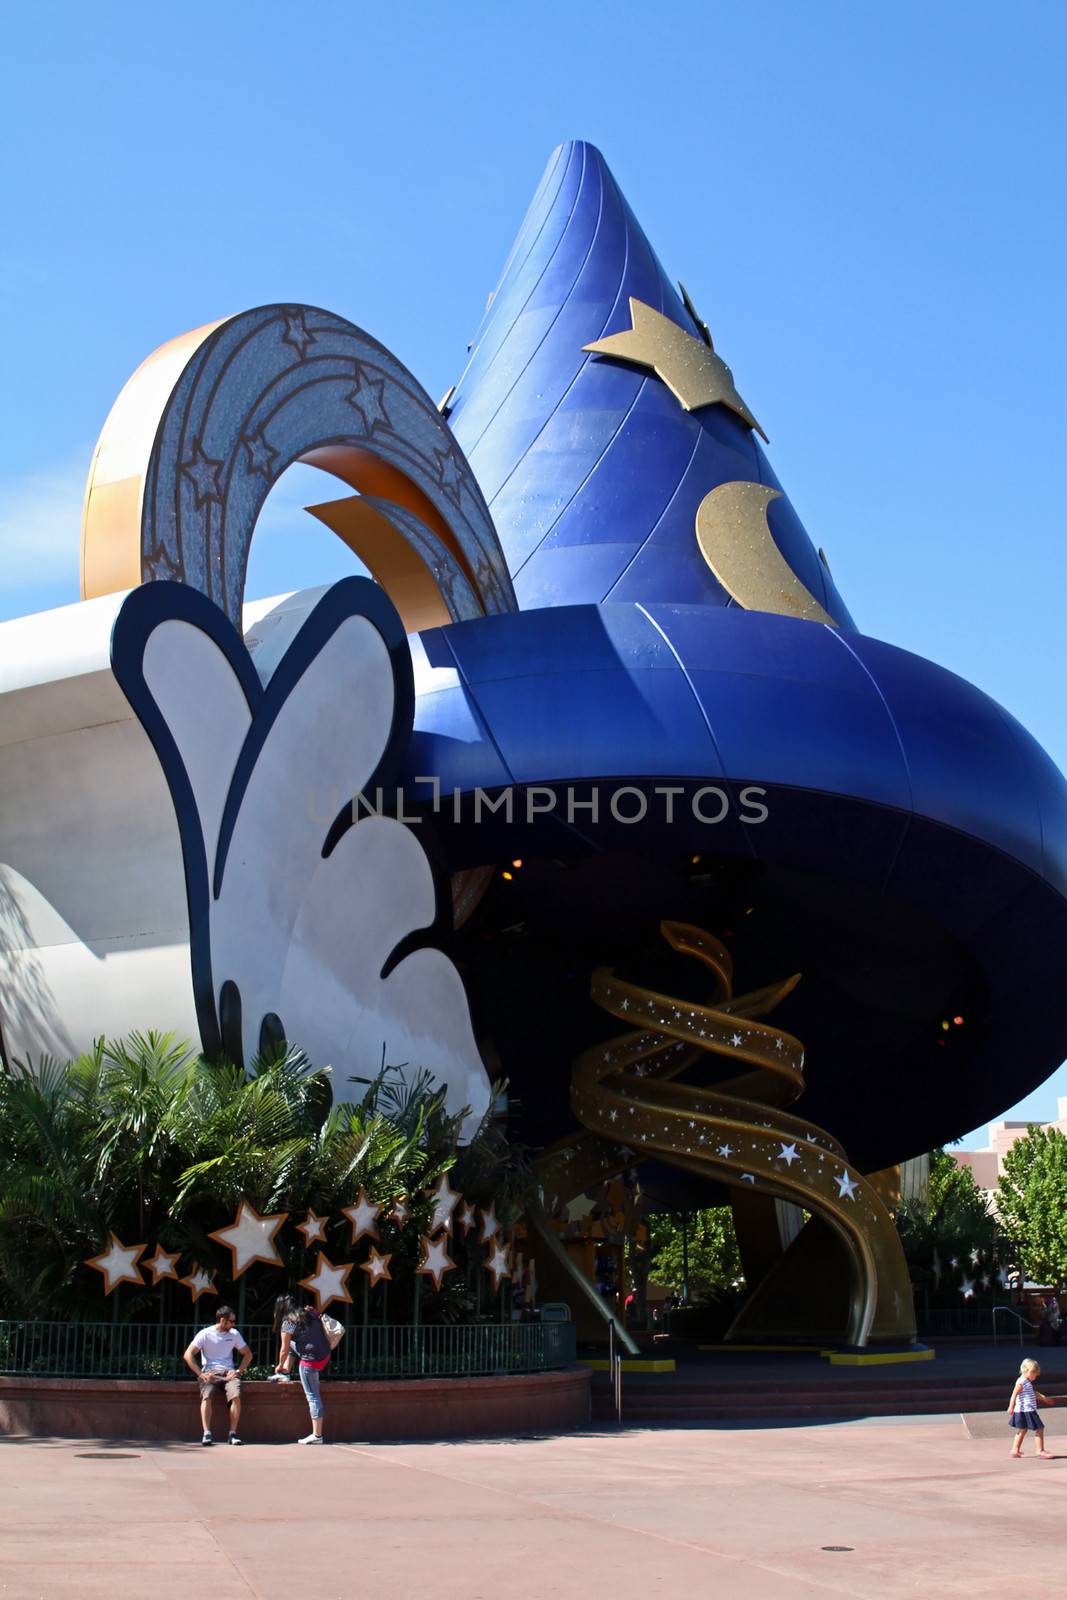 ORLANDO, FL - October 23, 2013: Mickey's Wizards Hat in Disney World Hollywood Studio amusement park in Orlando, FL. The park was formerly called MGM Studios.